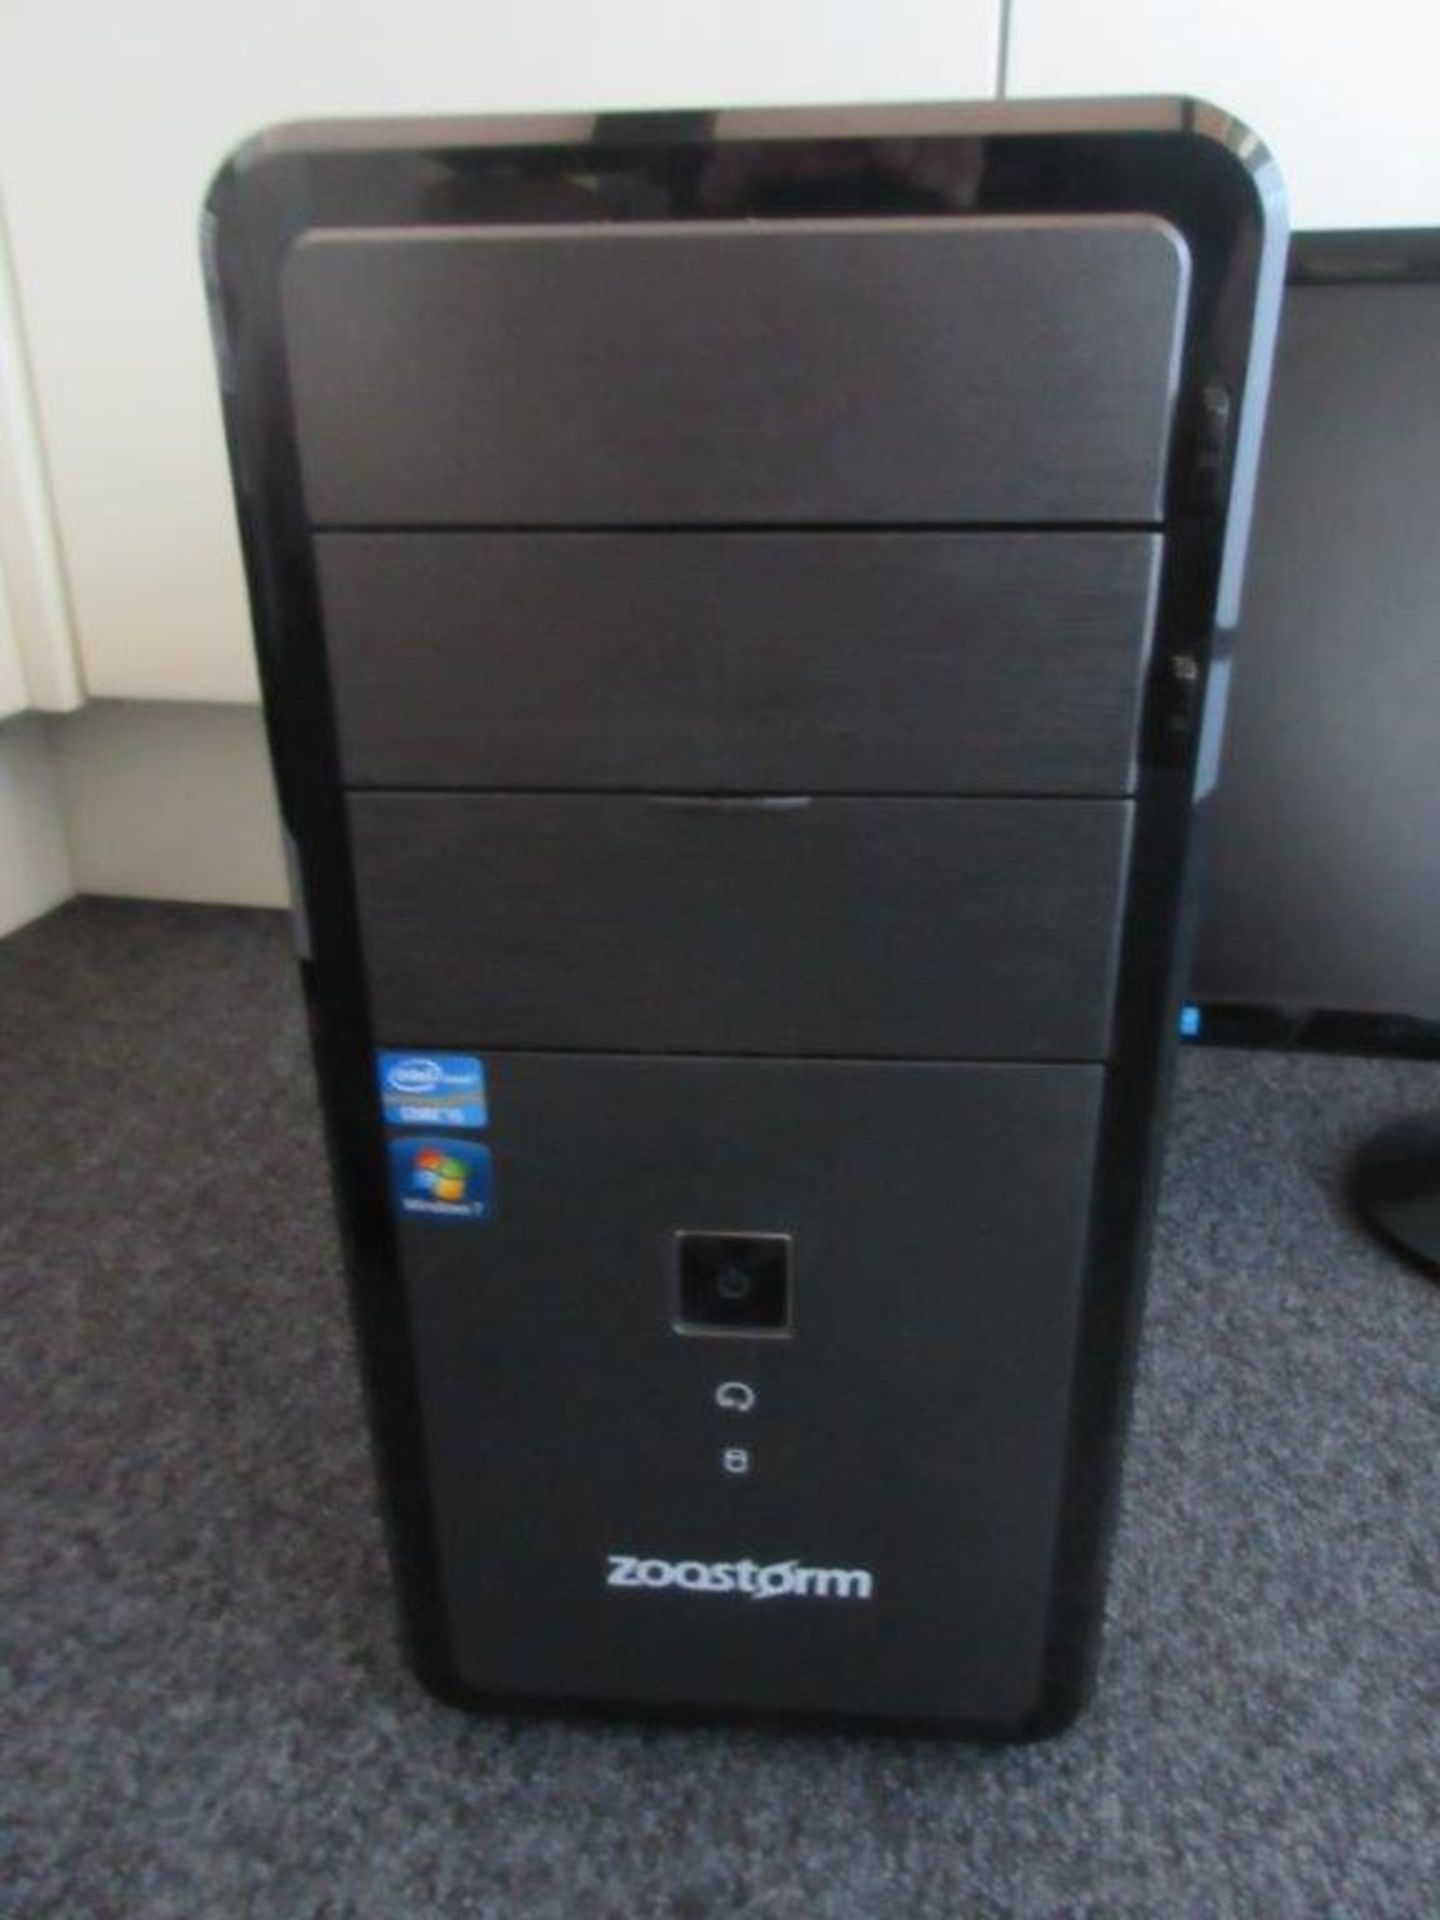 Zoostorm tower desktop computer with flat screen monitor incorporating i5 processor - Image 3 of 4